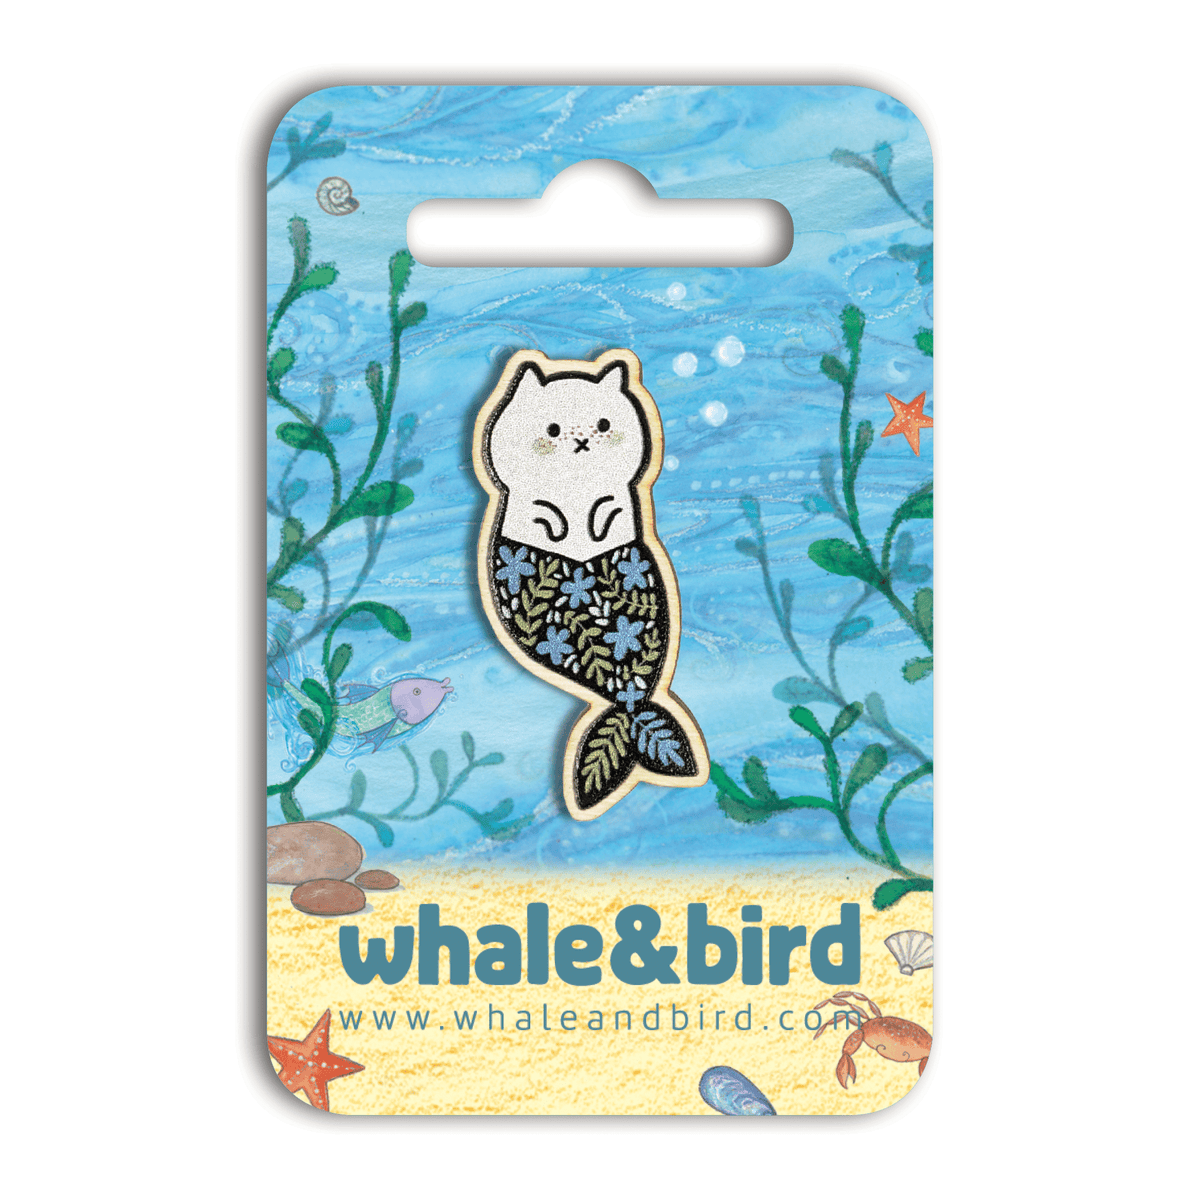 Mercat Hard Wooden Pin by Anna Alekseeva - Whale and Bird